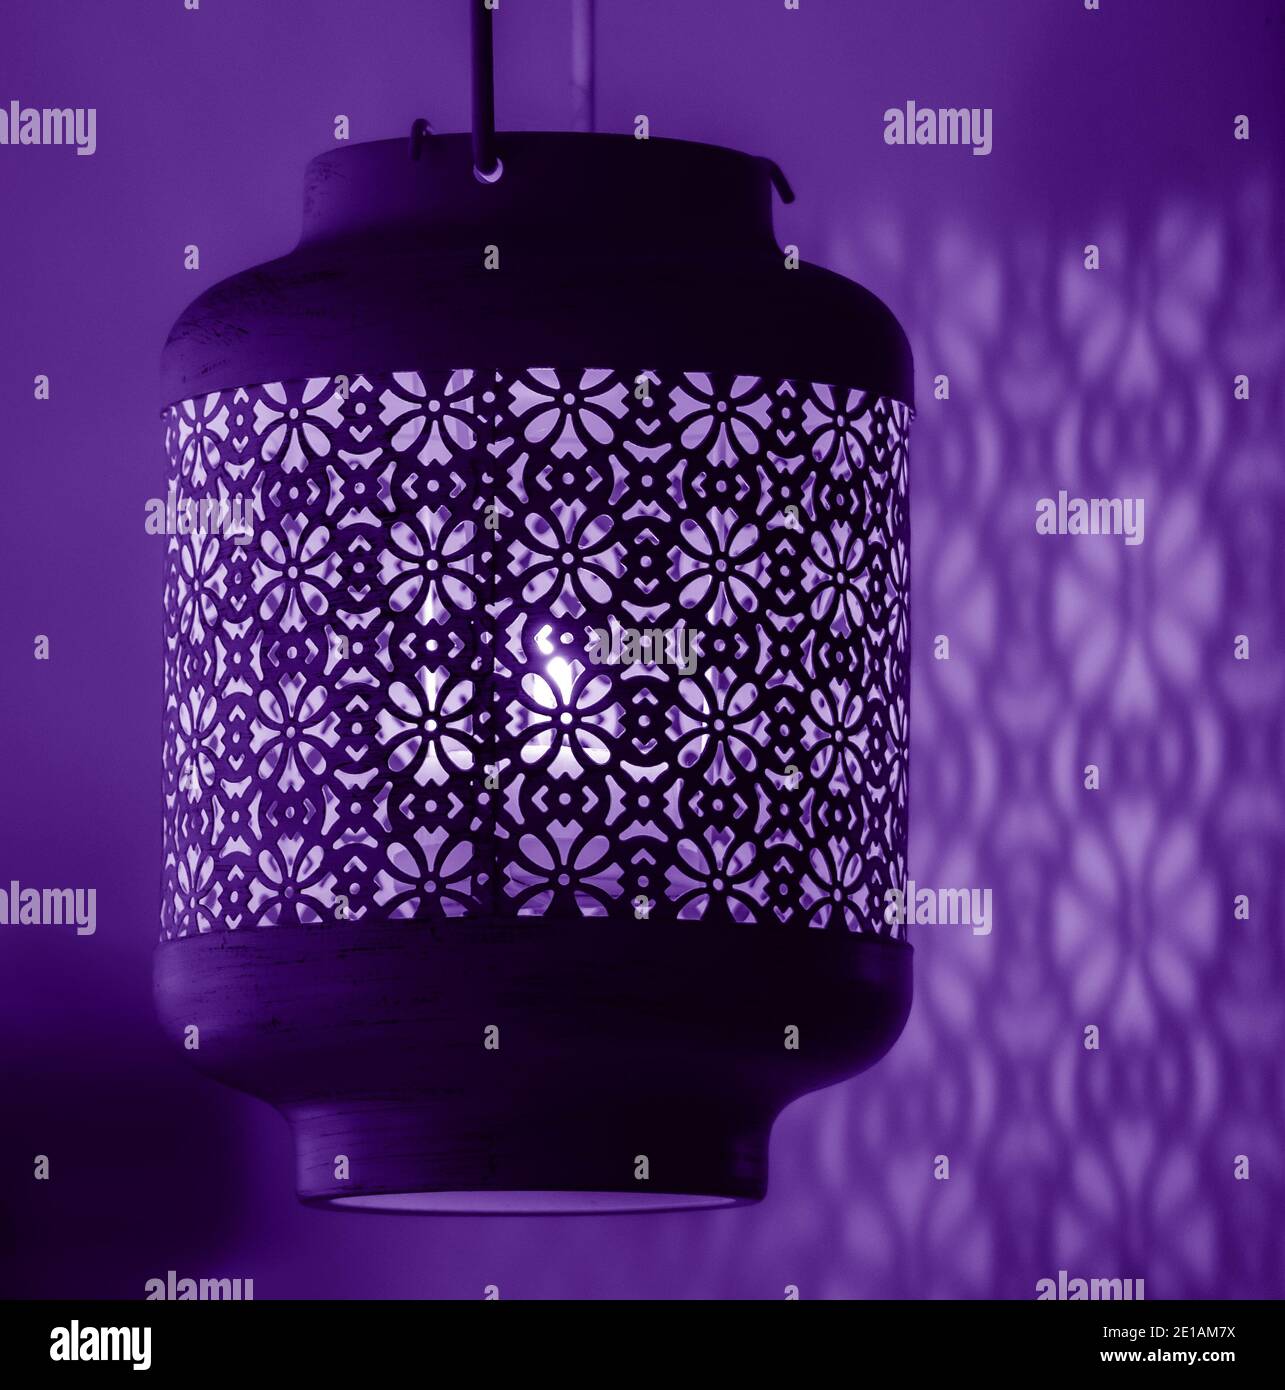 Candle light lamp with beautiful detailed antique patterns designs casting shadows over the near wall Stock Photo